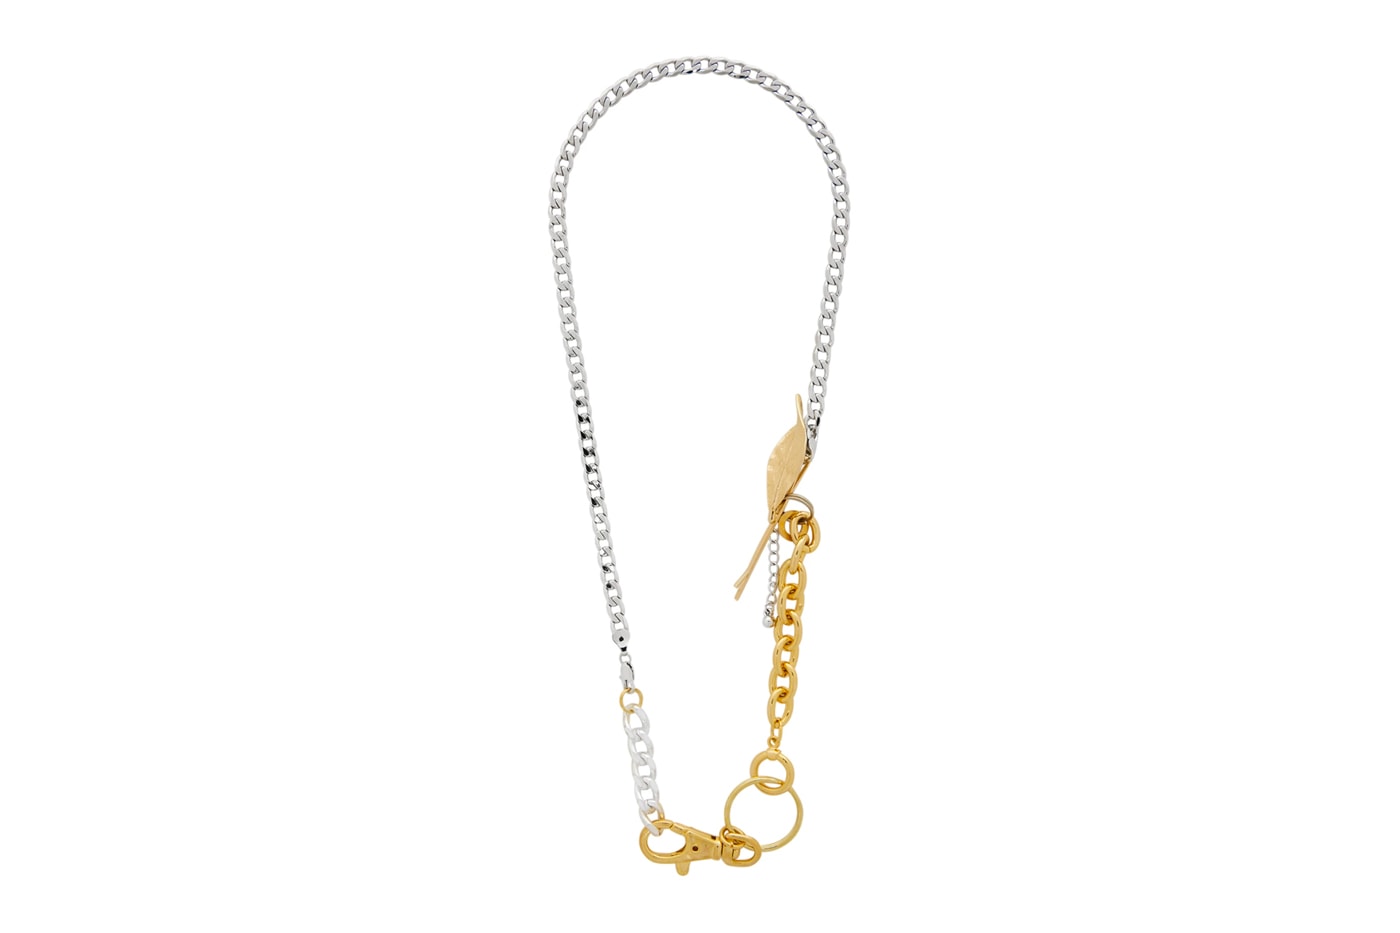 BLESS Materialmix Bracelet Hairpin Necklace Release Info Buy Price Gold Silver SSENSE